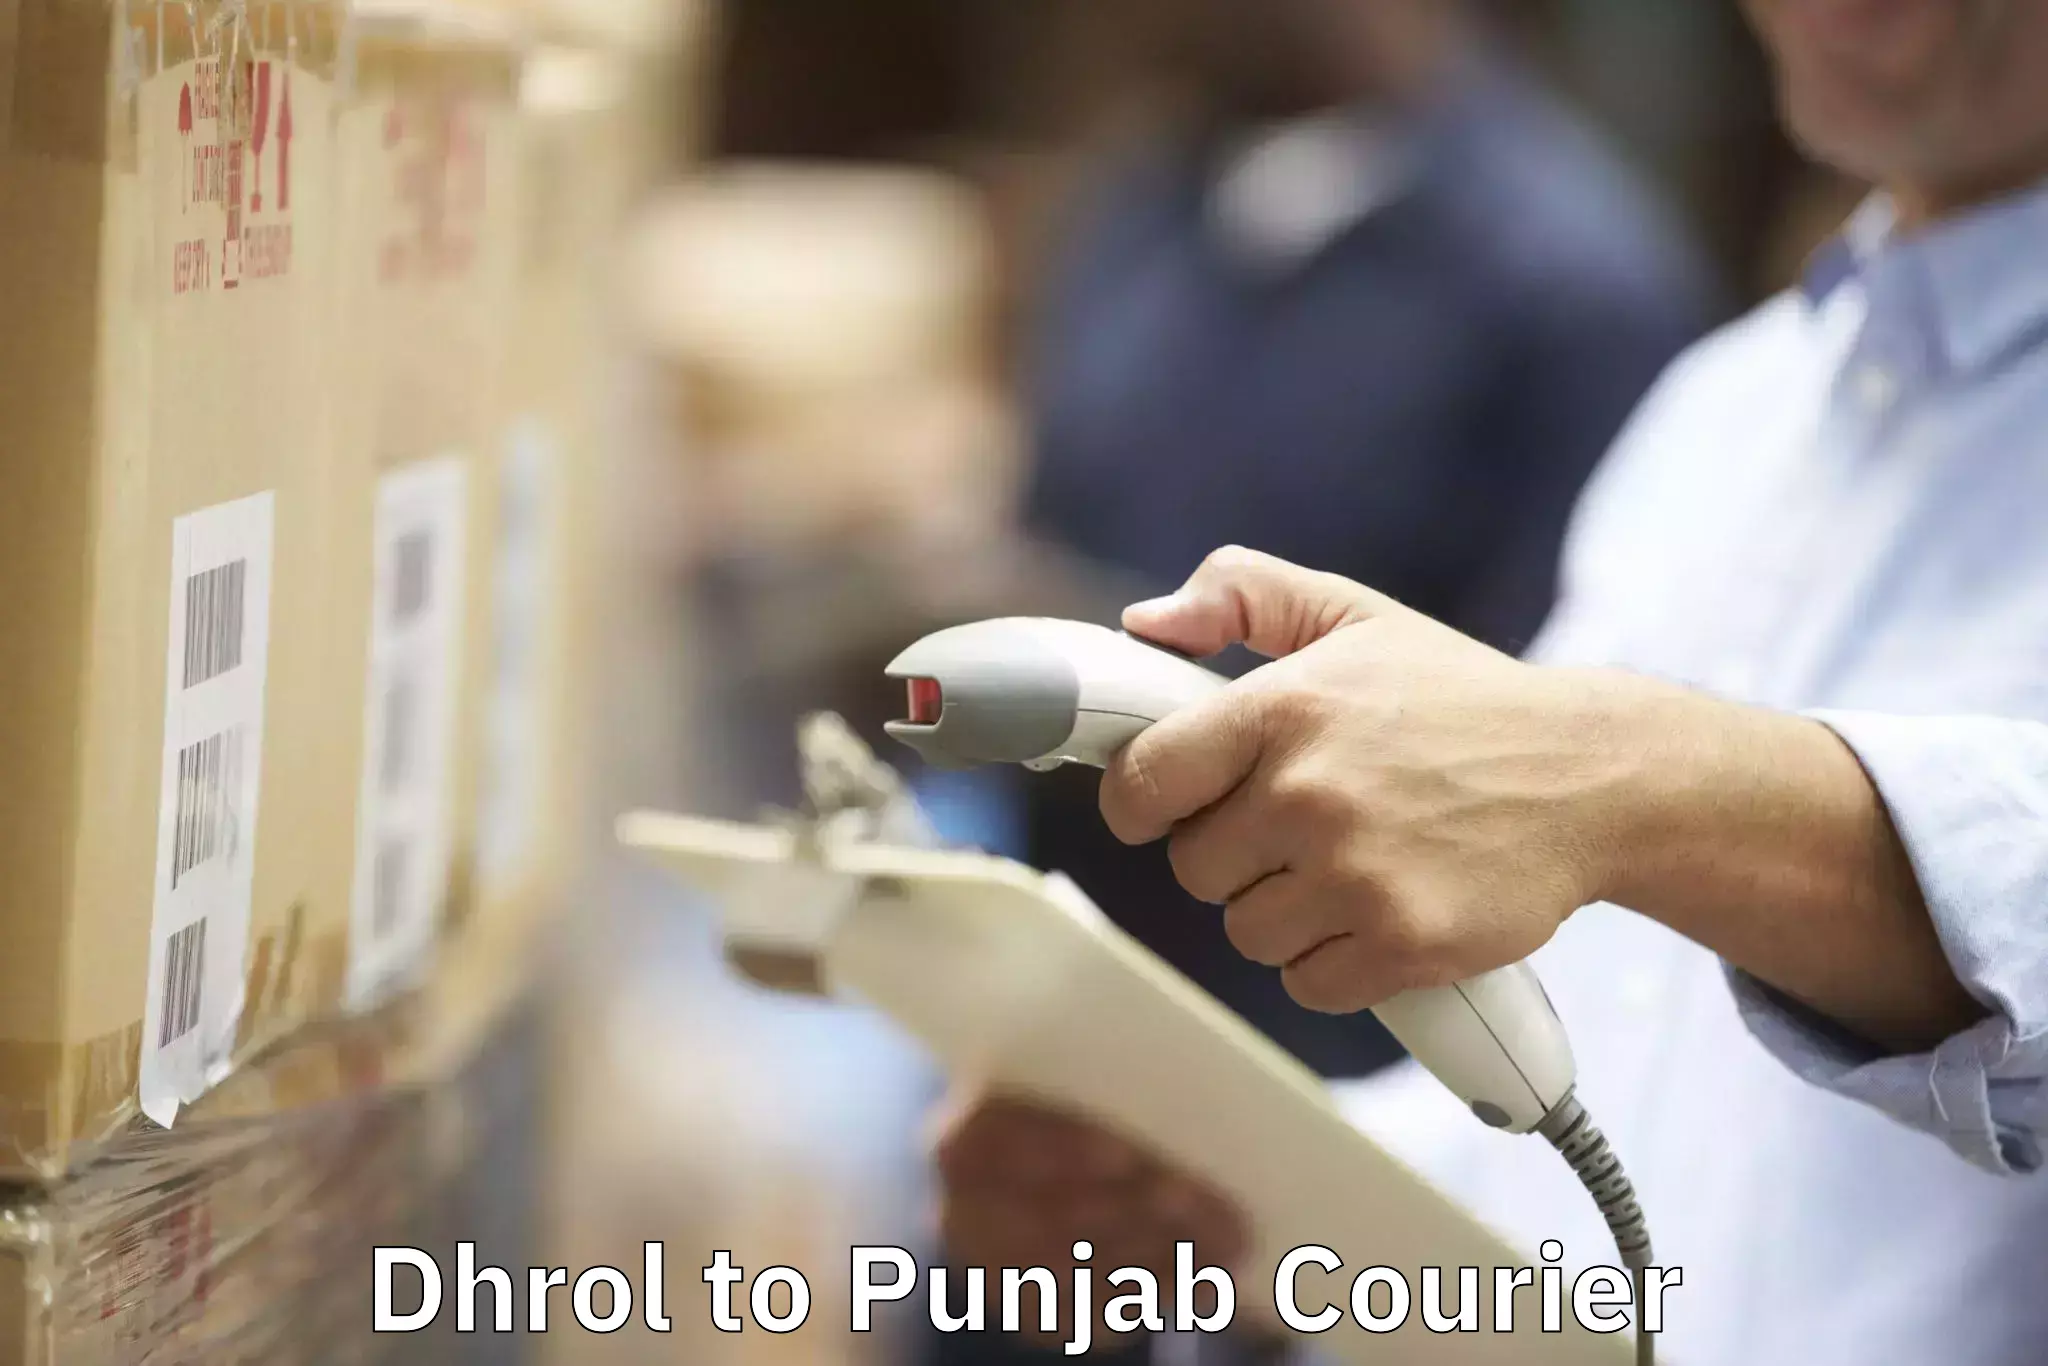 Home relocation experts Dhrol to Punjab